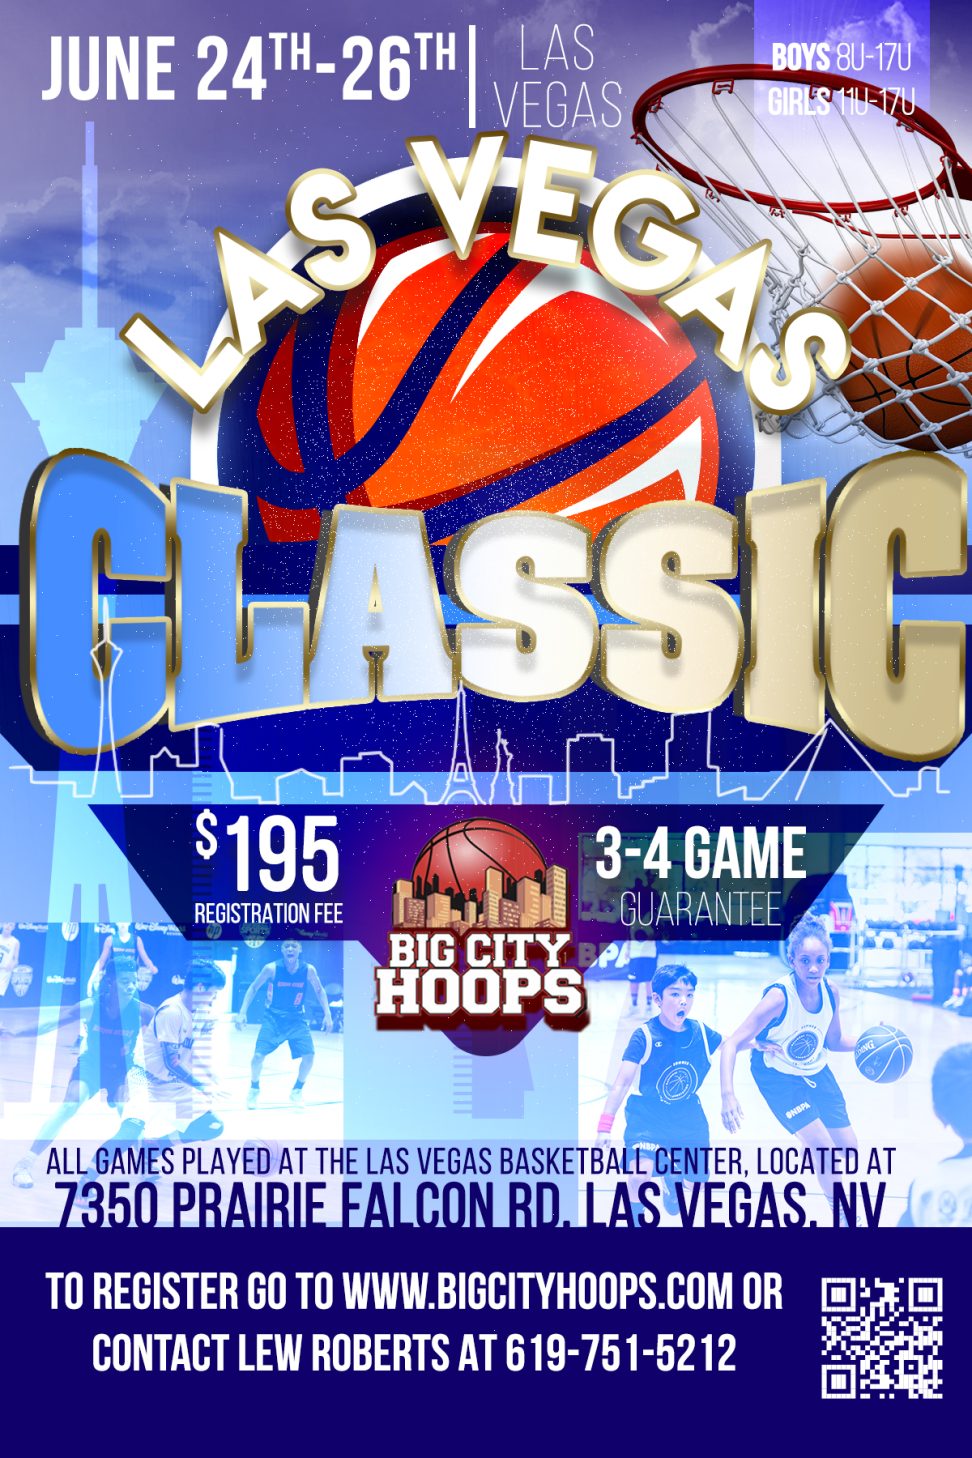 A poster for the las vegas classic basketball game.